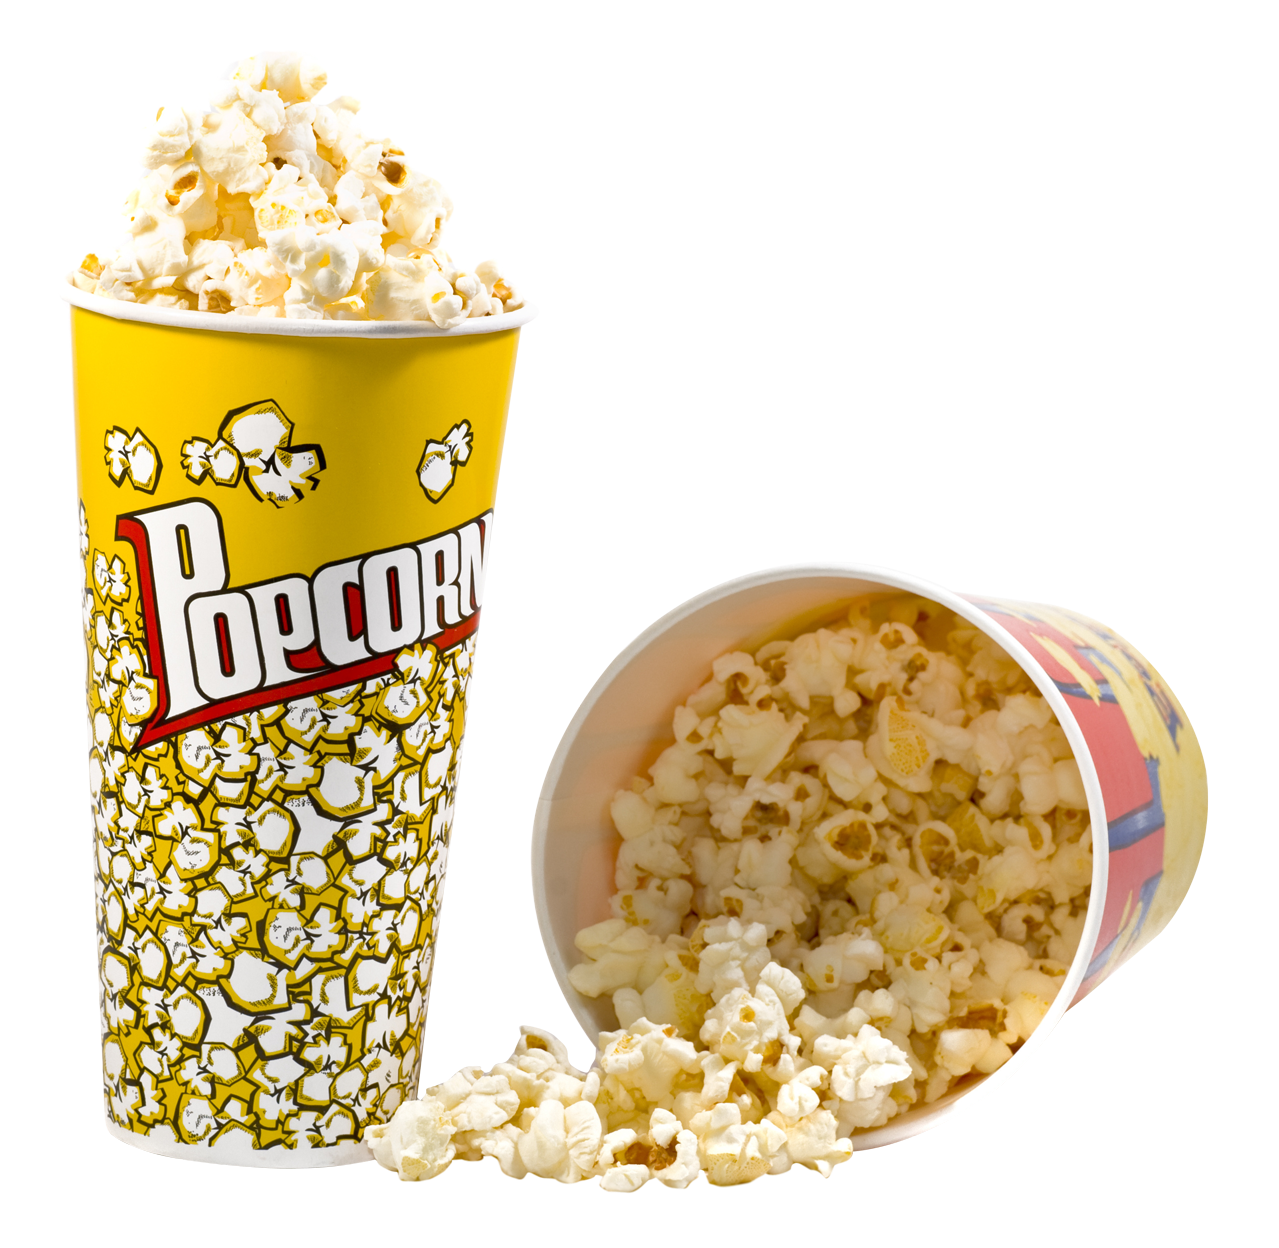 A Bucket Of Popcorn And A Bucket Of Popcorn